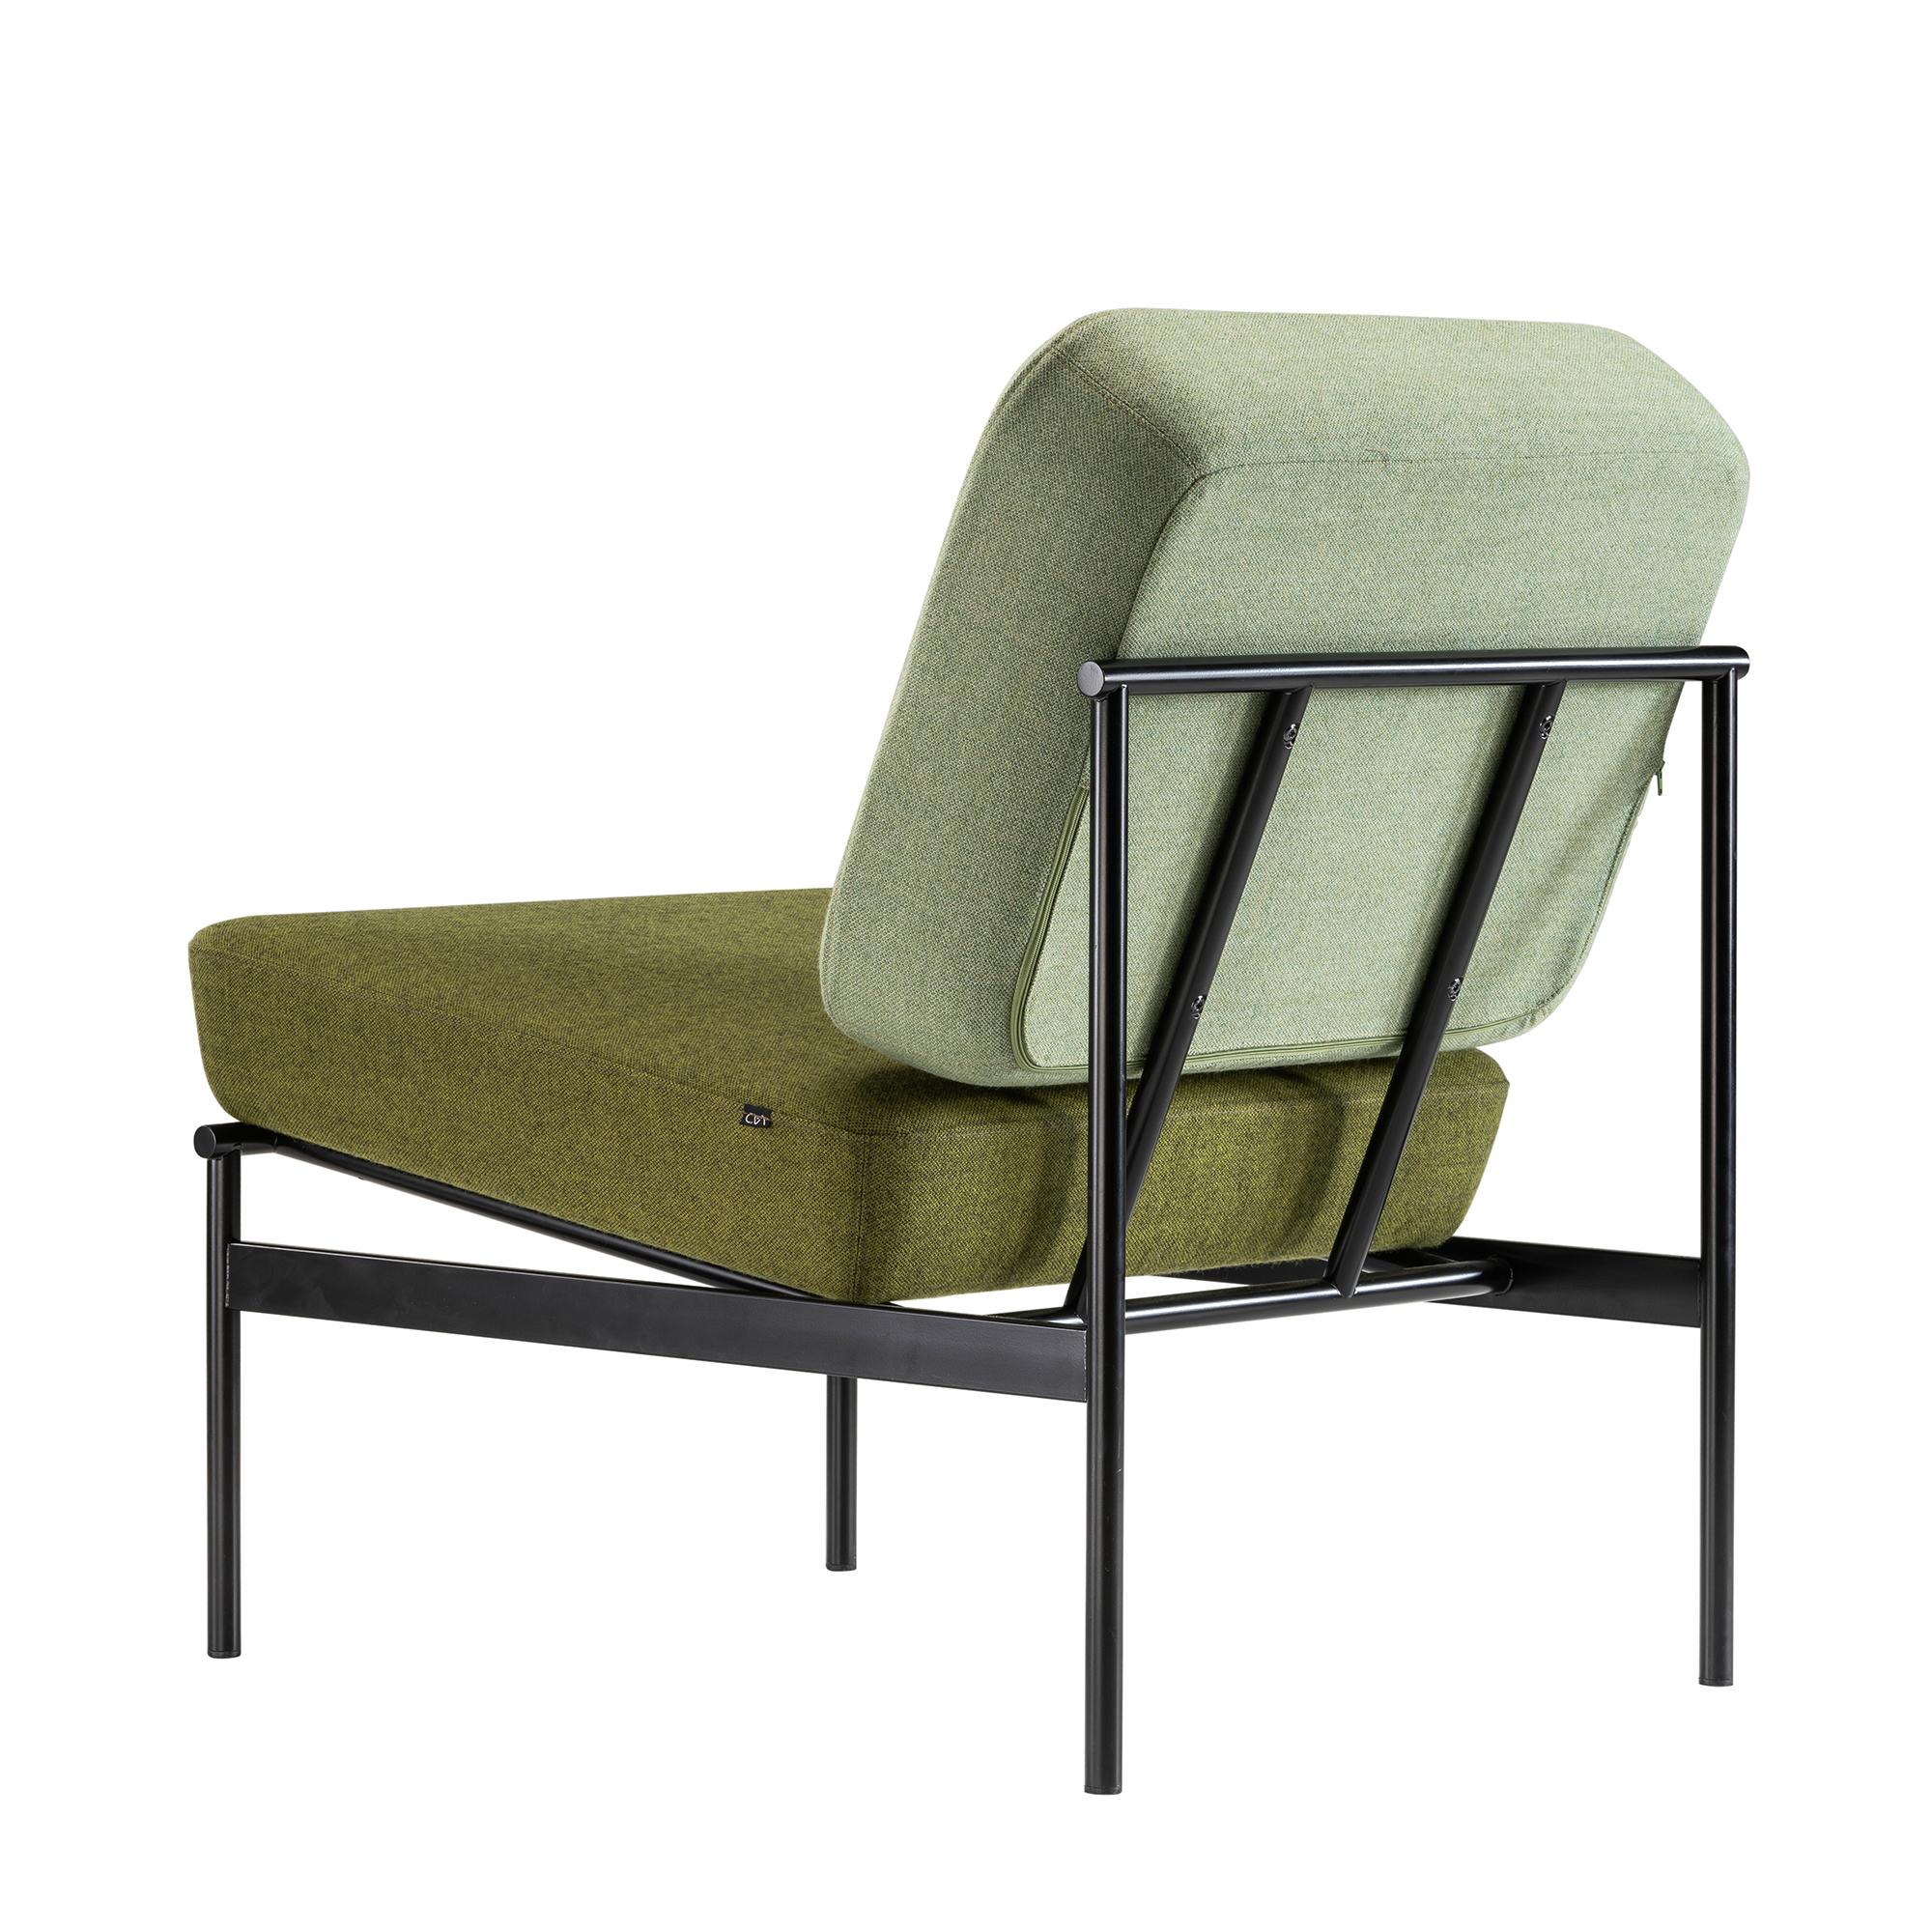 Post-Modern Set of 2 Dapple Lounge Chairs by Edvin Klasson For Sale